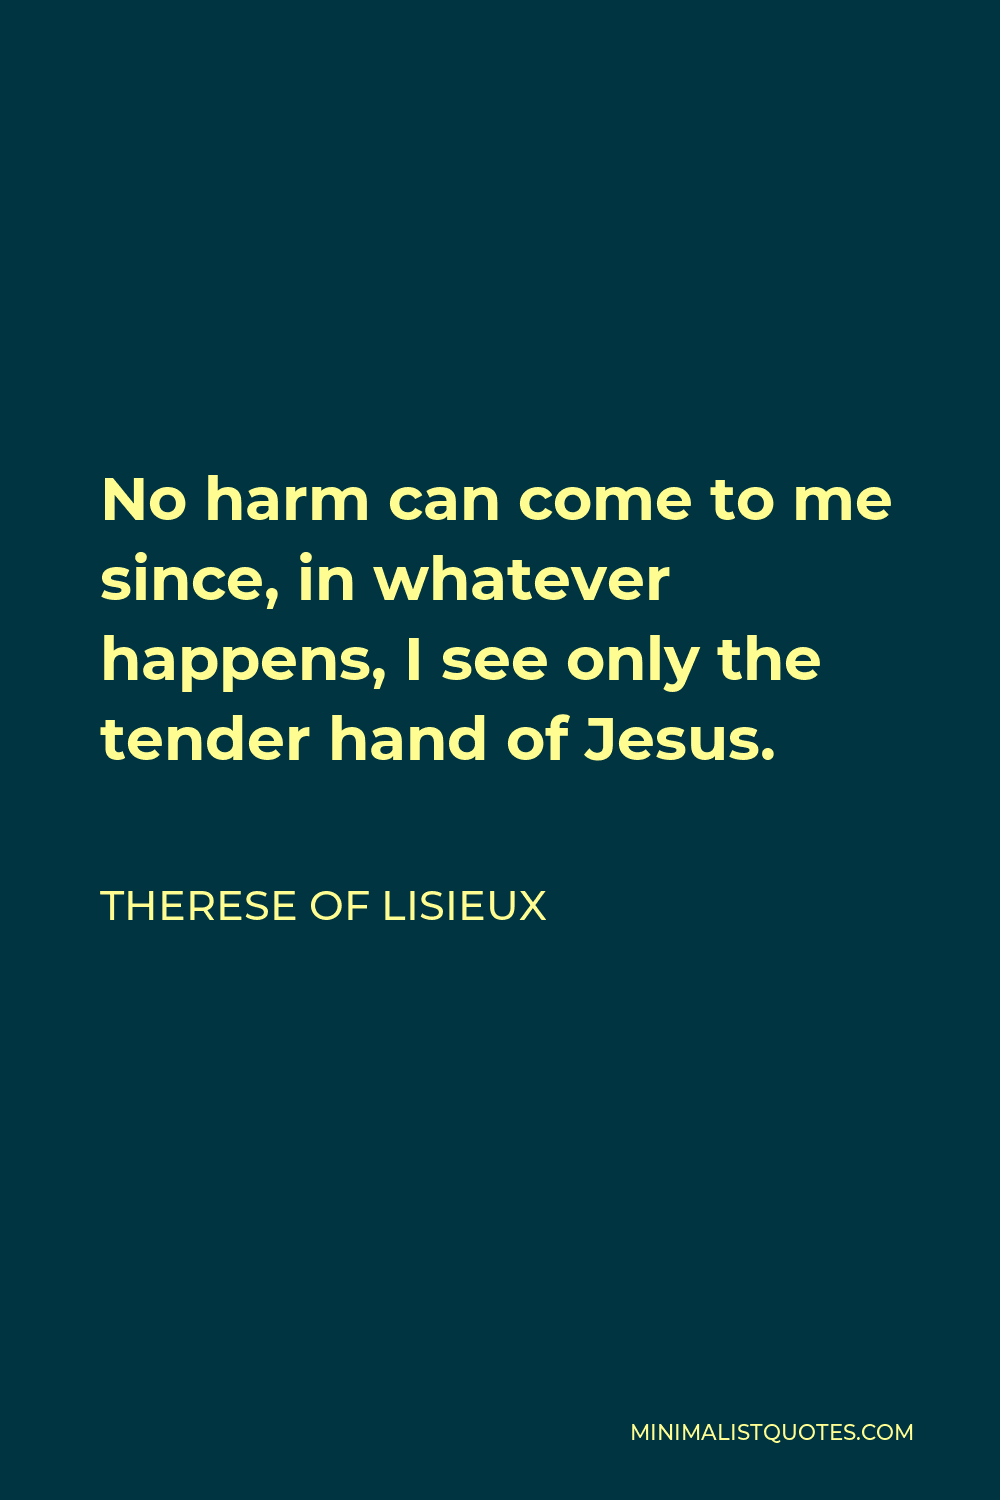 Therese of Lisieux Quote - No harm can come to me since, in whatever happens, I see only the tender hand of Jesus.